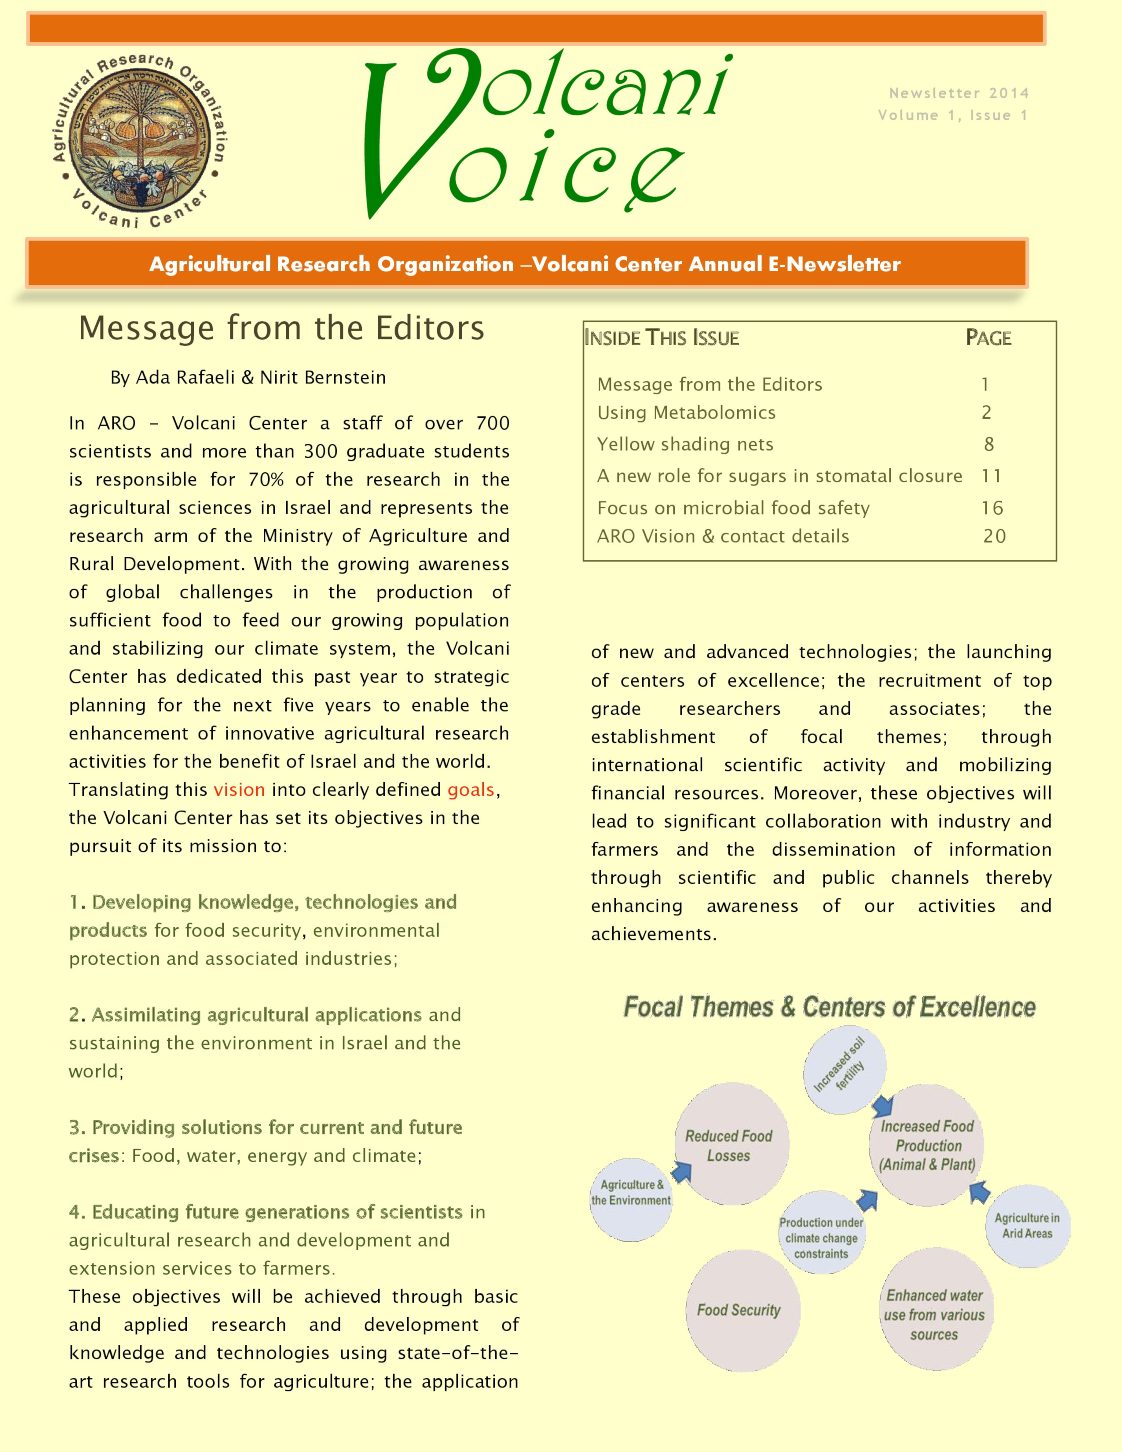 Volcani Voice Issue.1 Vol.1 2014